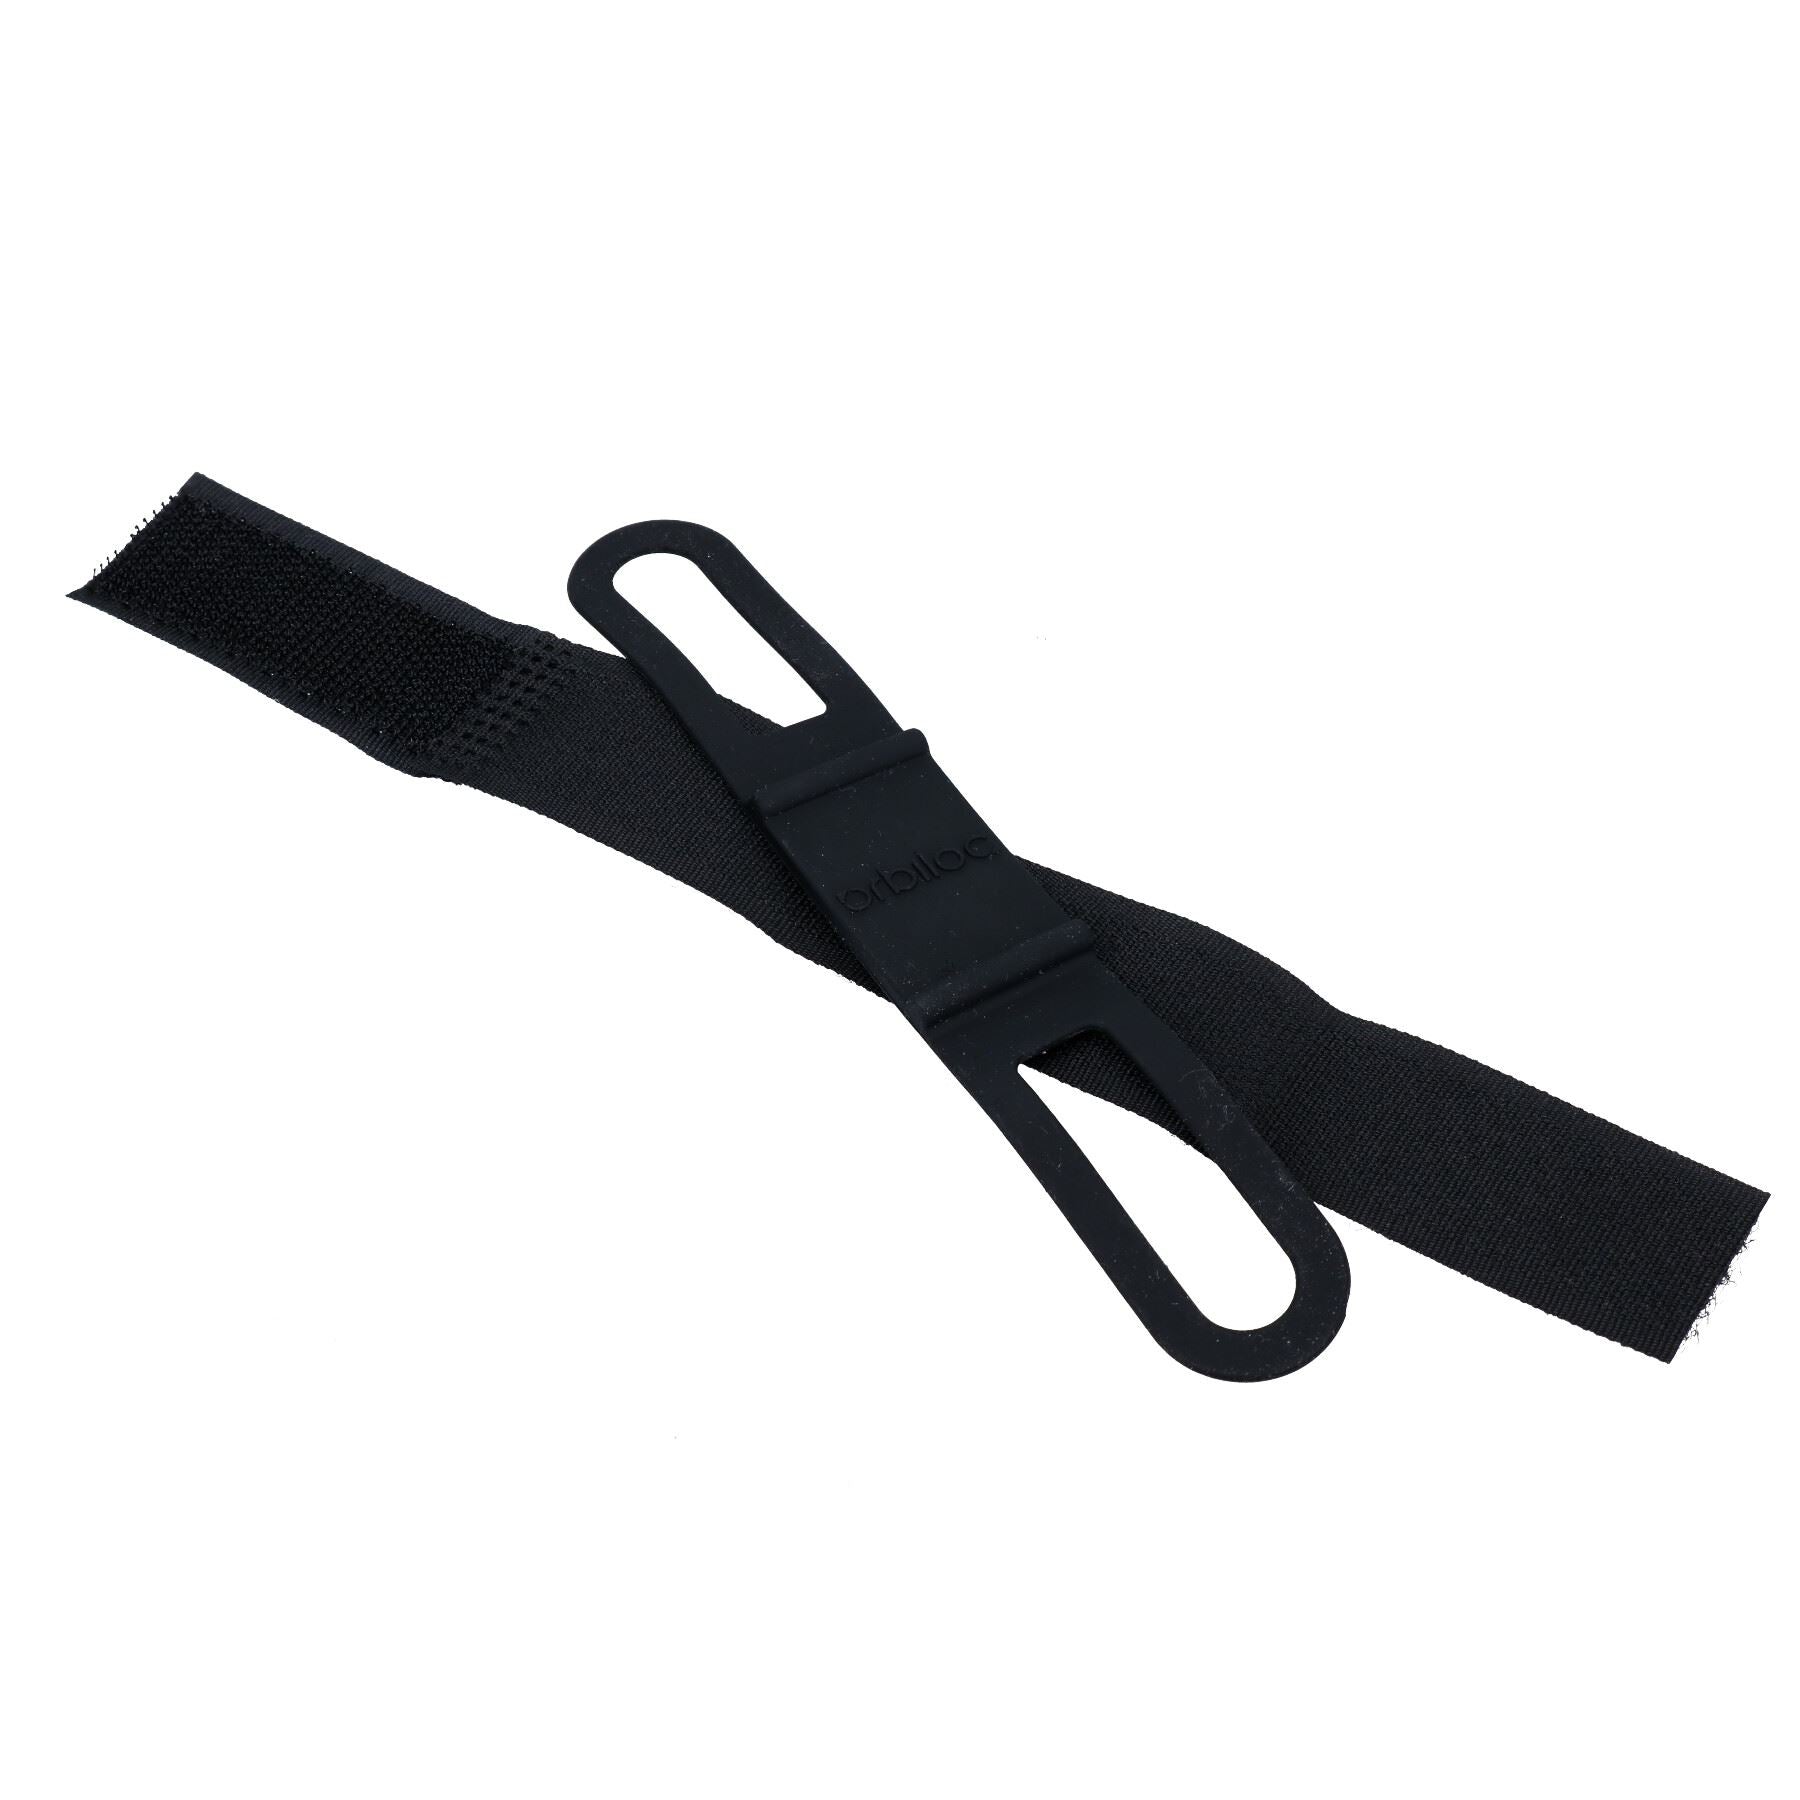 Orbiloc Replacement Straps for Dual Flashing/Solid Safety LED Light for Dogs